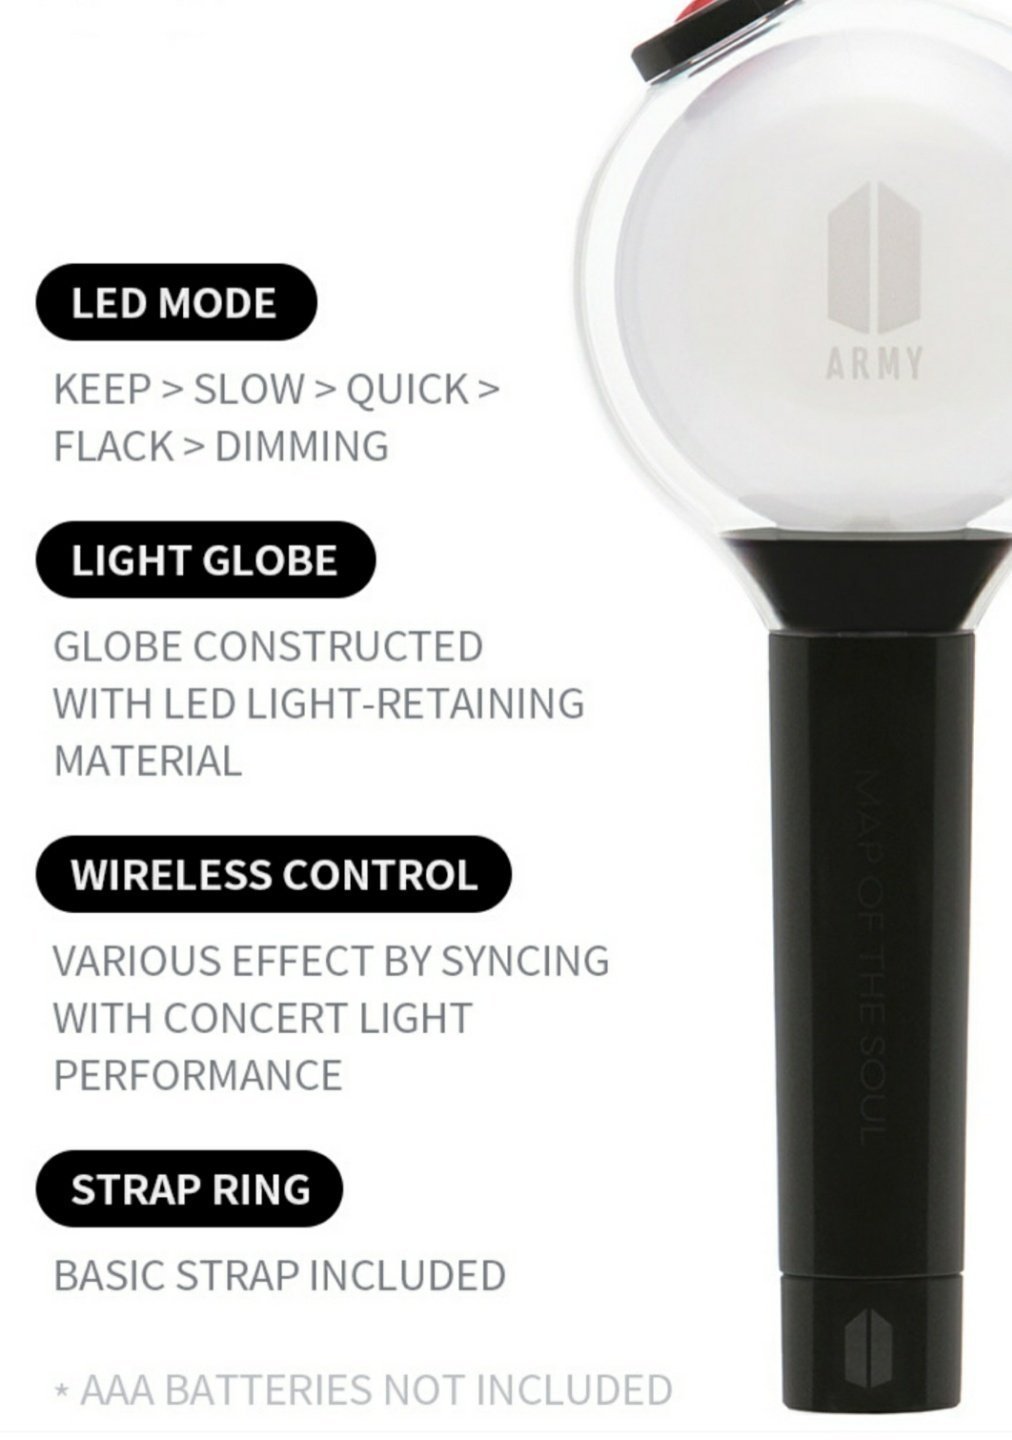 JOJOJOSDA BTS Army Bomb Lightstick Ver 4 (SE) Map of The Soul 7 Special  Edition, Connect Mobile APP to Adjust The Customize Color(Includes 7 Cards)